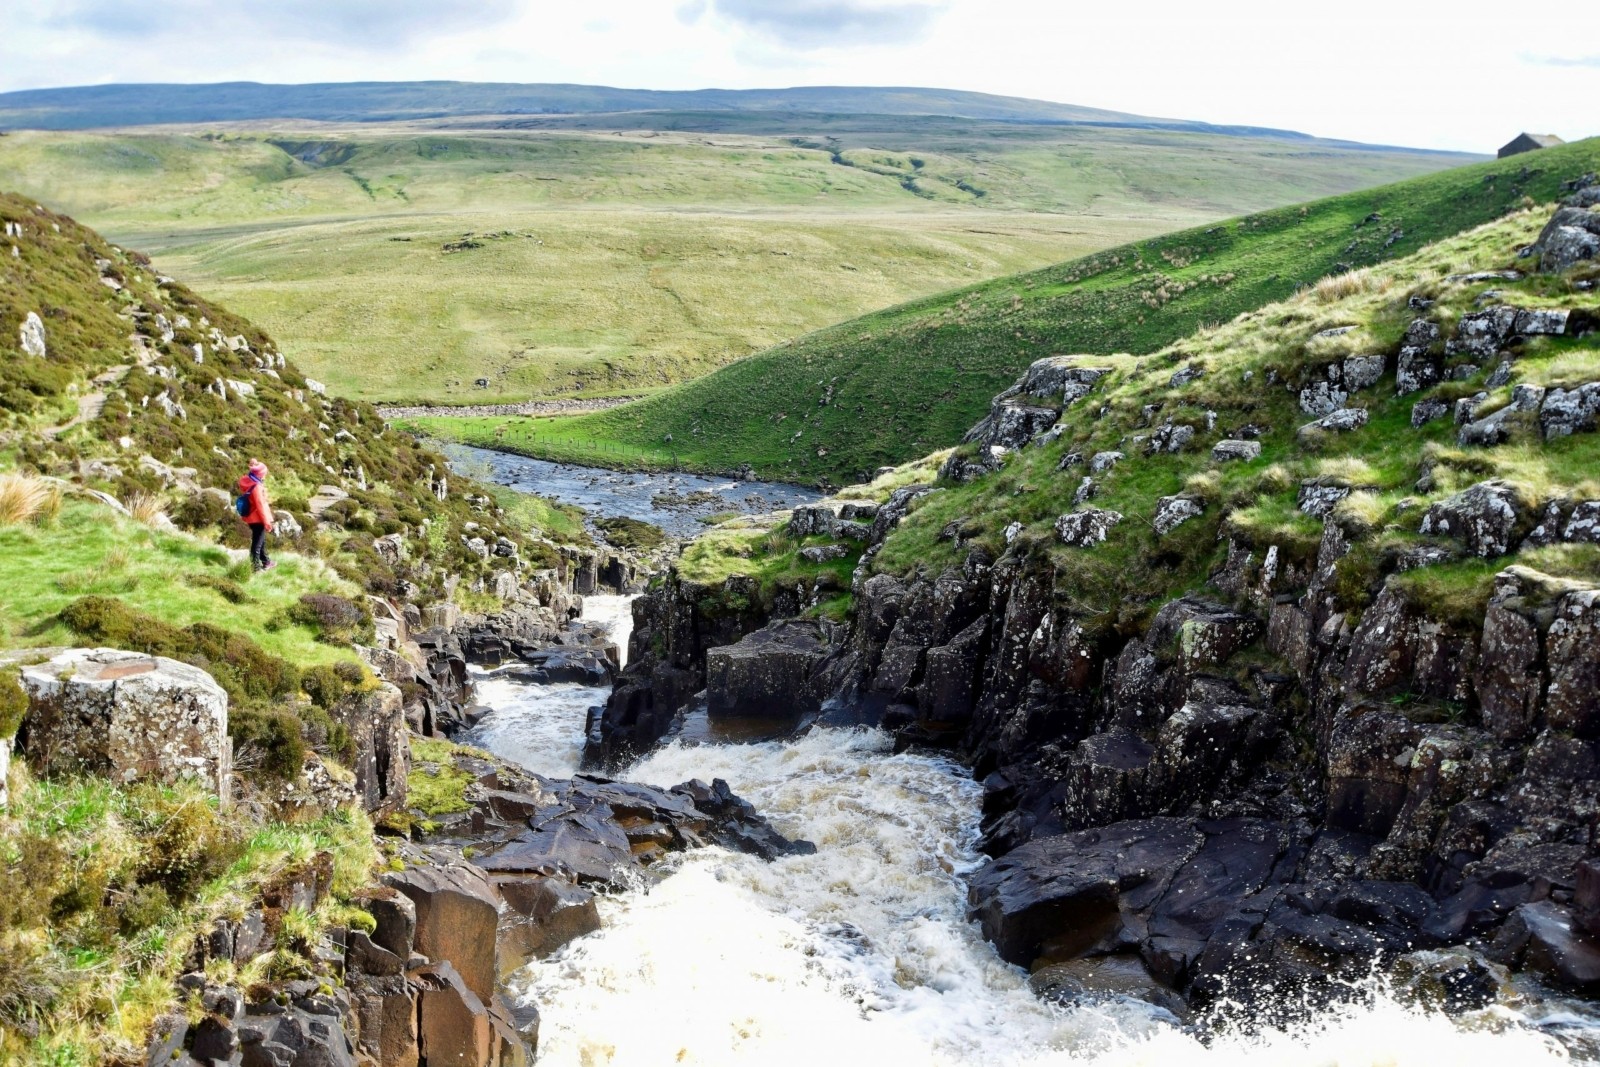 The upper course of a river with rapids as the river flows through steep V-shaped valleys.